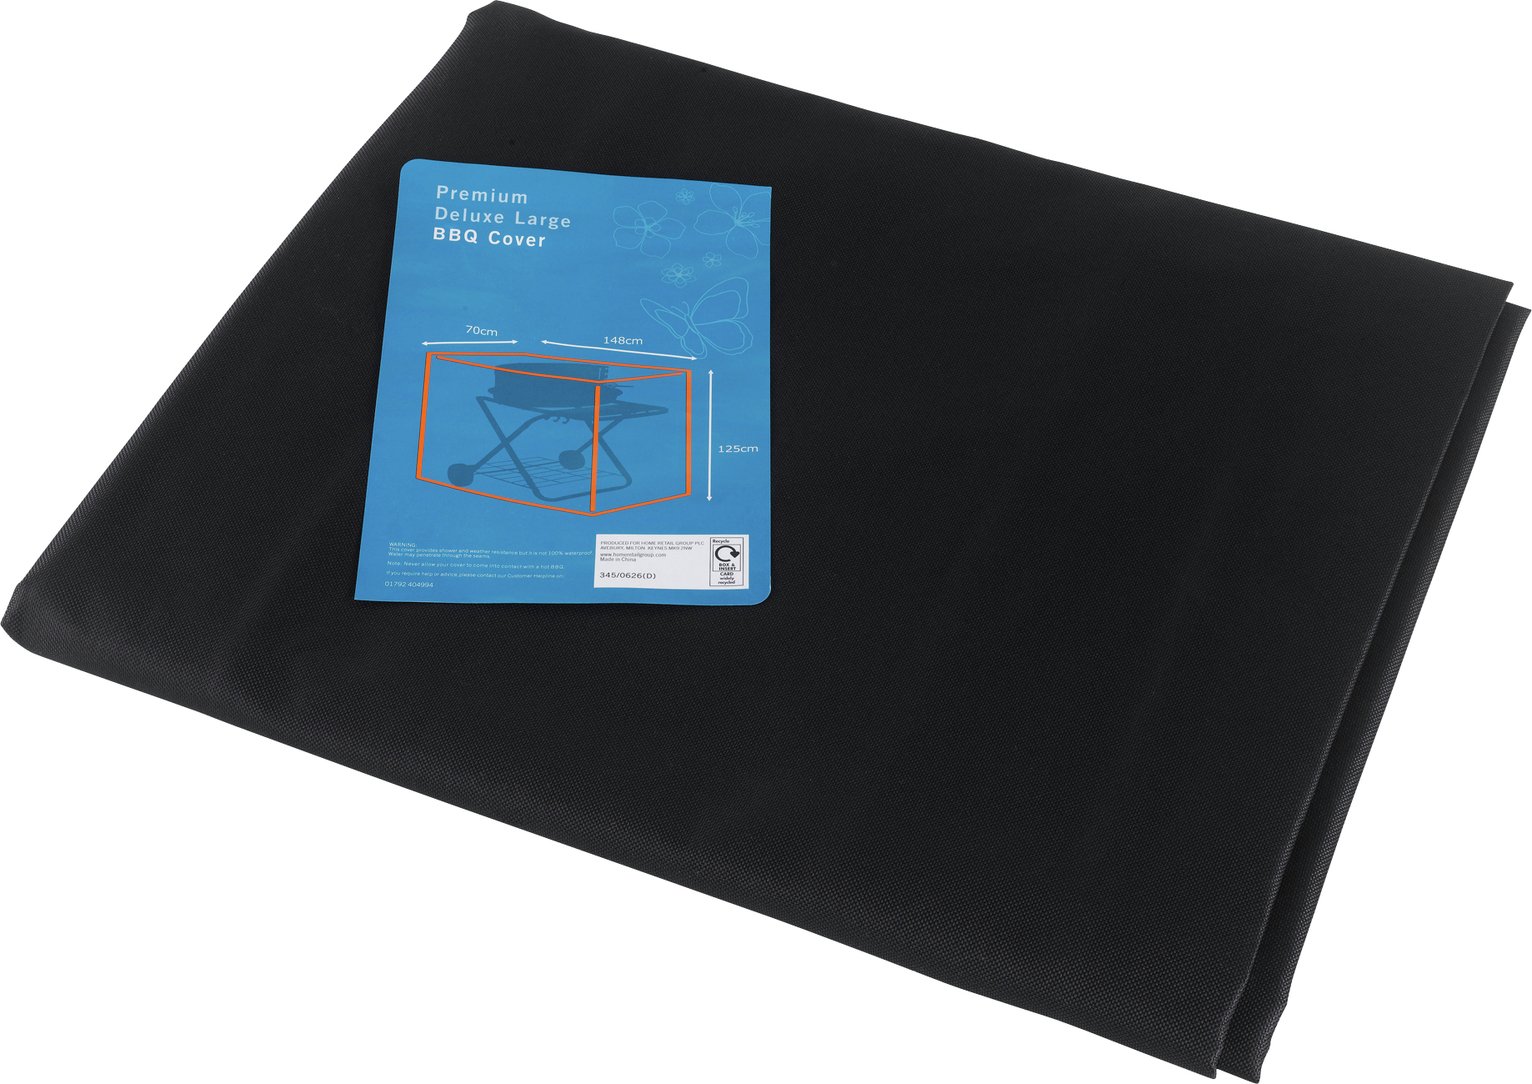 Deluxe Large BBQ Cover Review